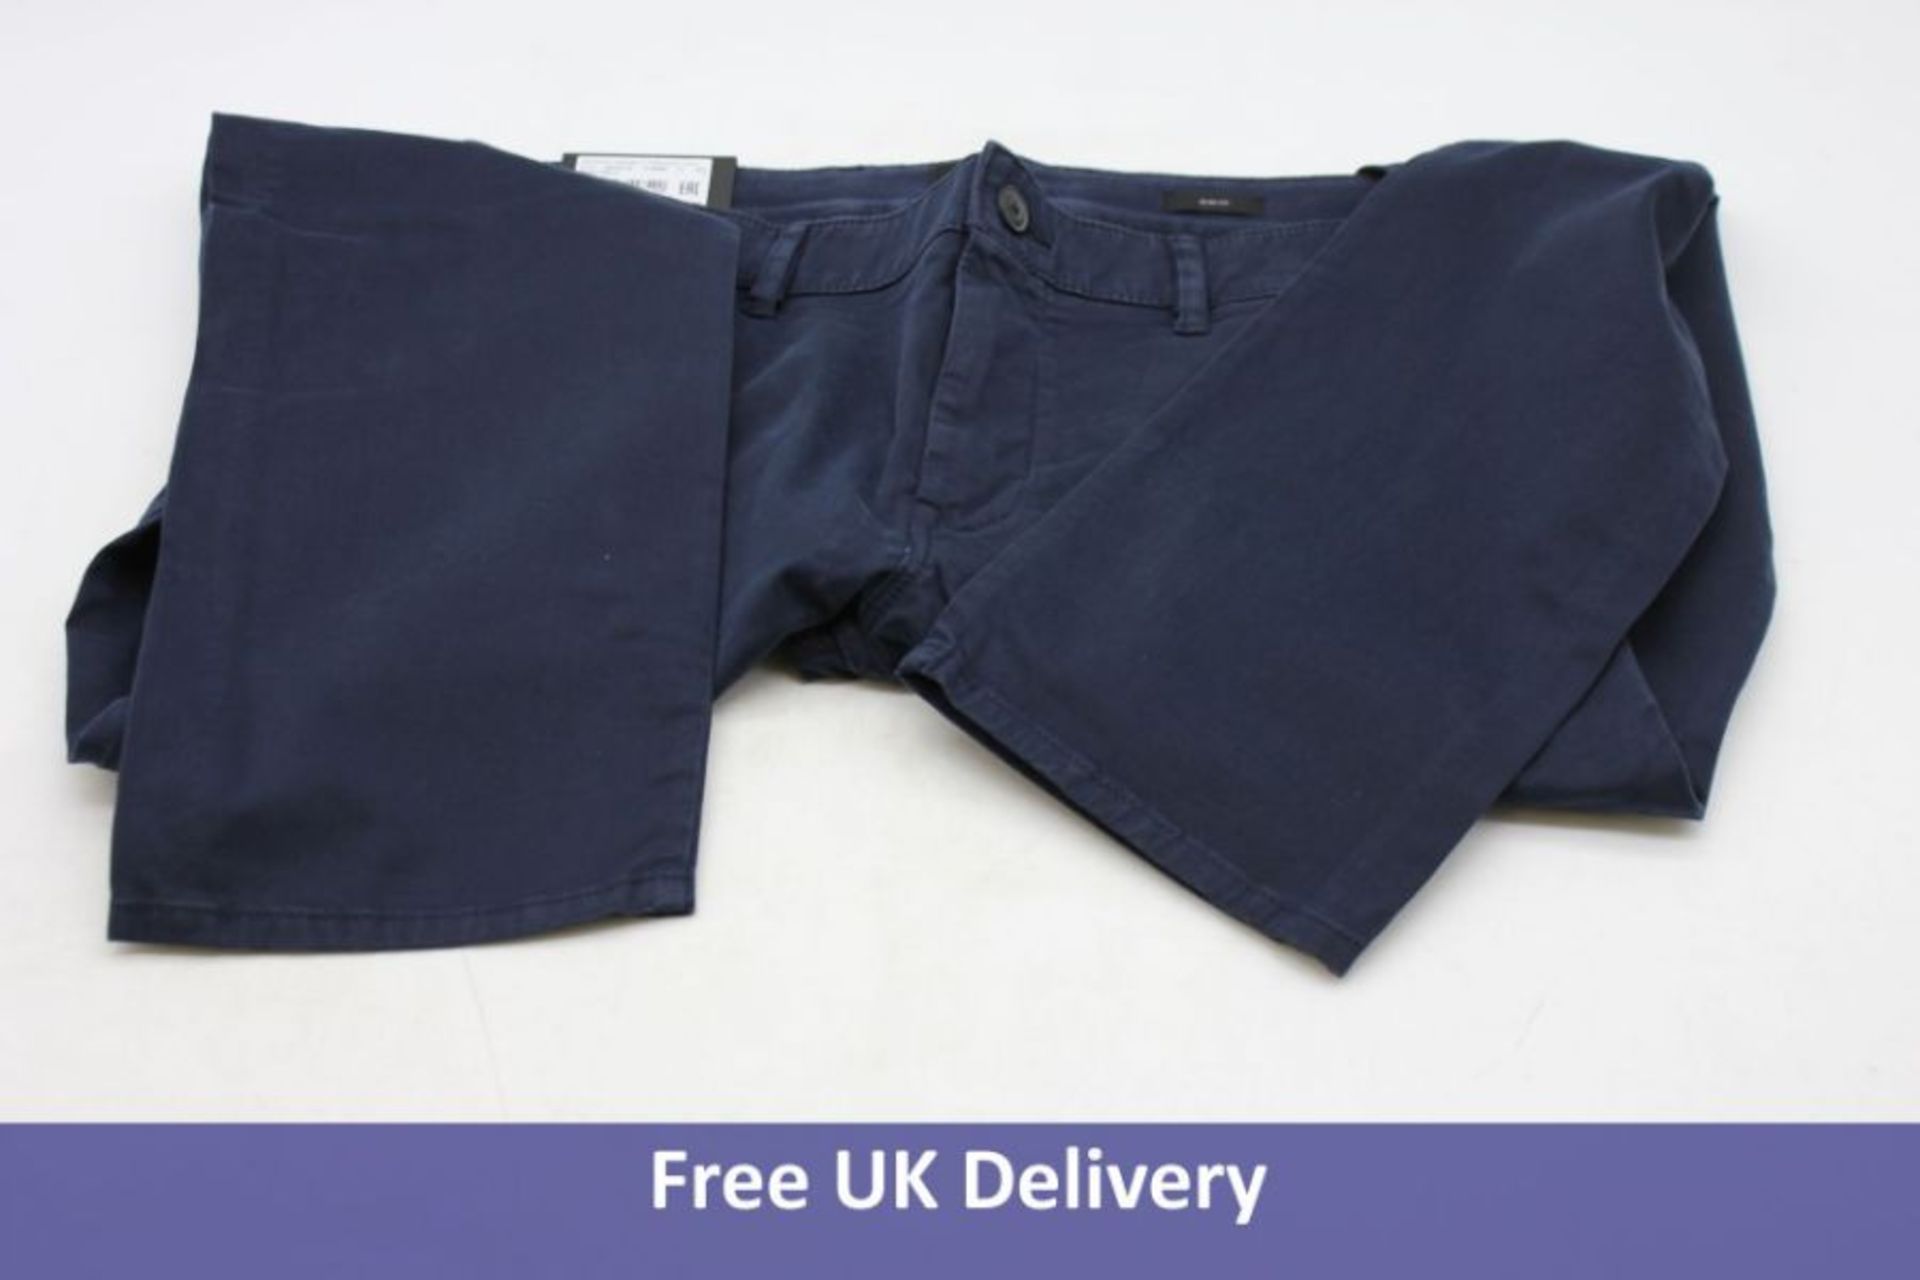 Two items of Hugo Boss Men's Clothing to include 1x Slim Fit Casual Chinos Dark Blue, UK 34/32 and 1